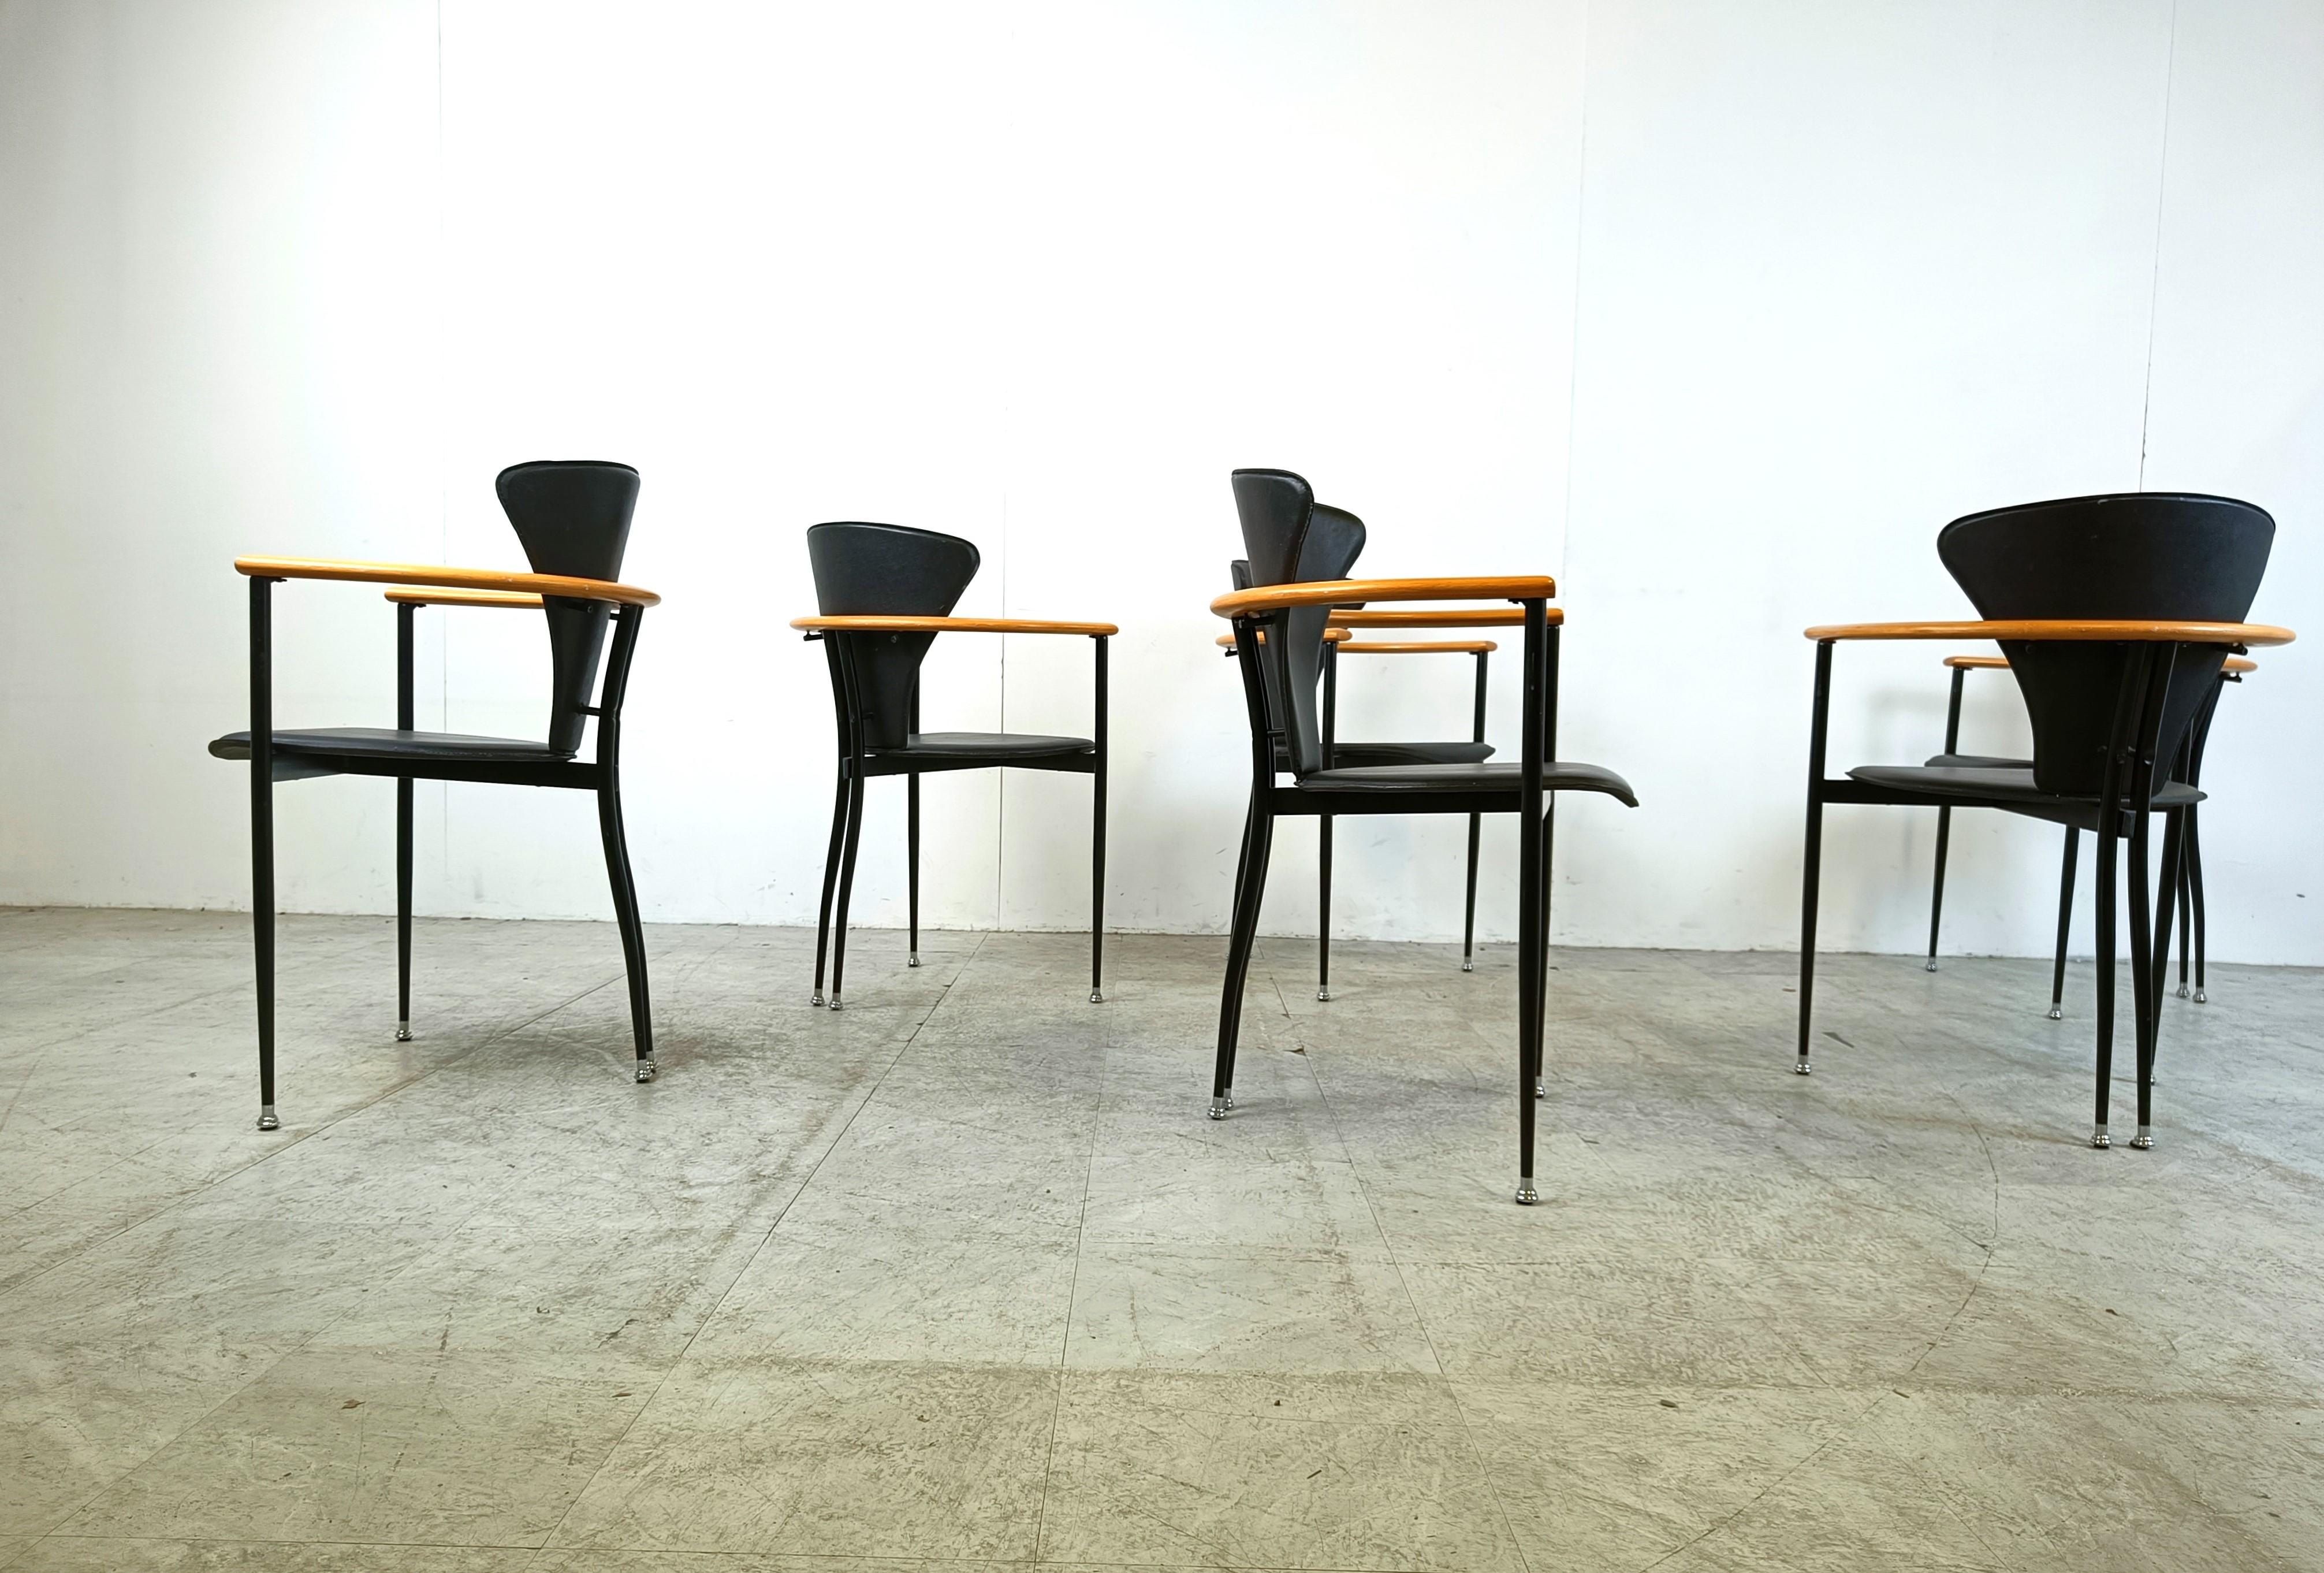 Set of 6 italian dining chairs consisting of black metal frames with black leather backrests and seats and beautiful wooden armrests.

Cool design with curved metal legs.

Very good condition

1980s - Italy

Dimensions:
Height: 85cm/33.46